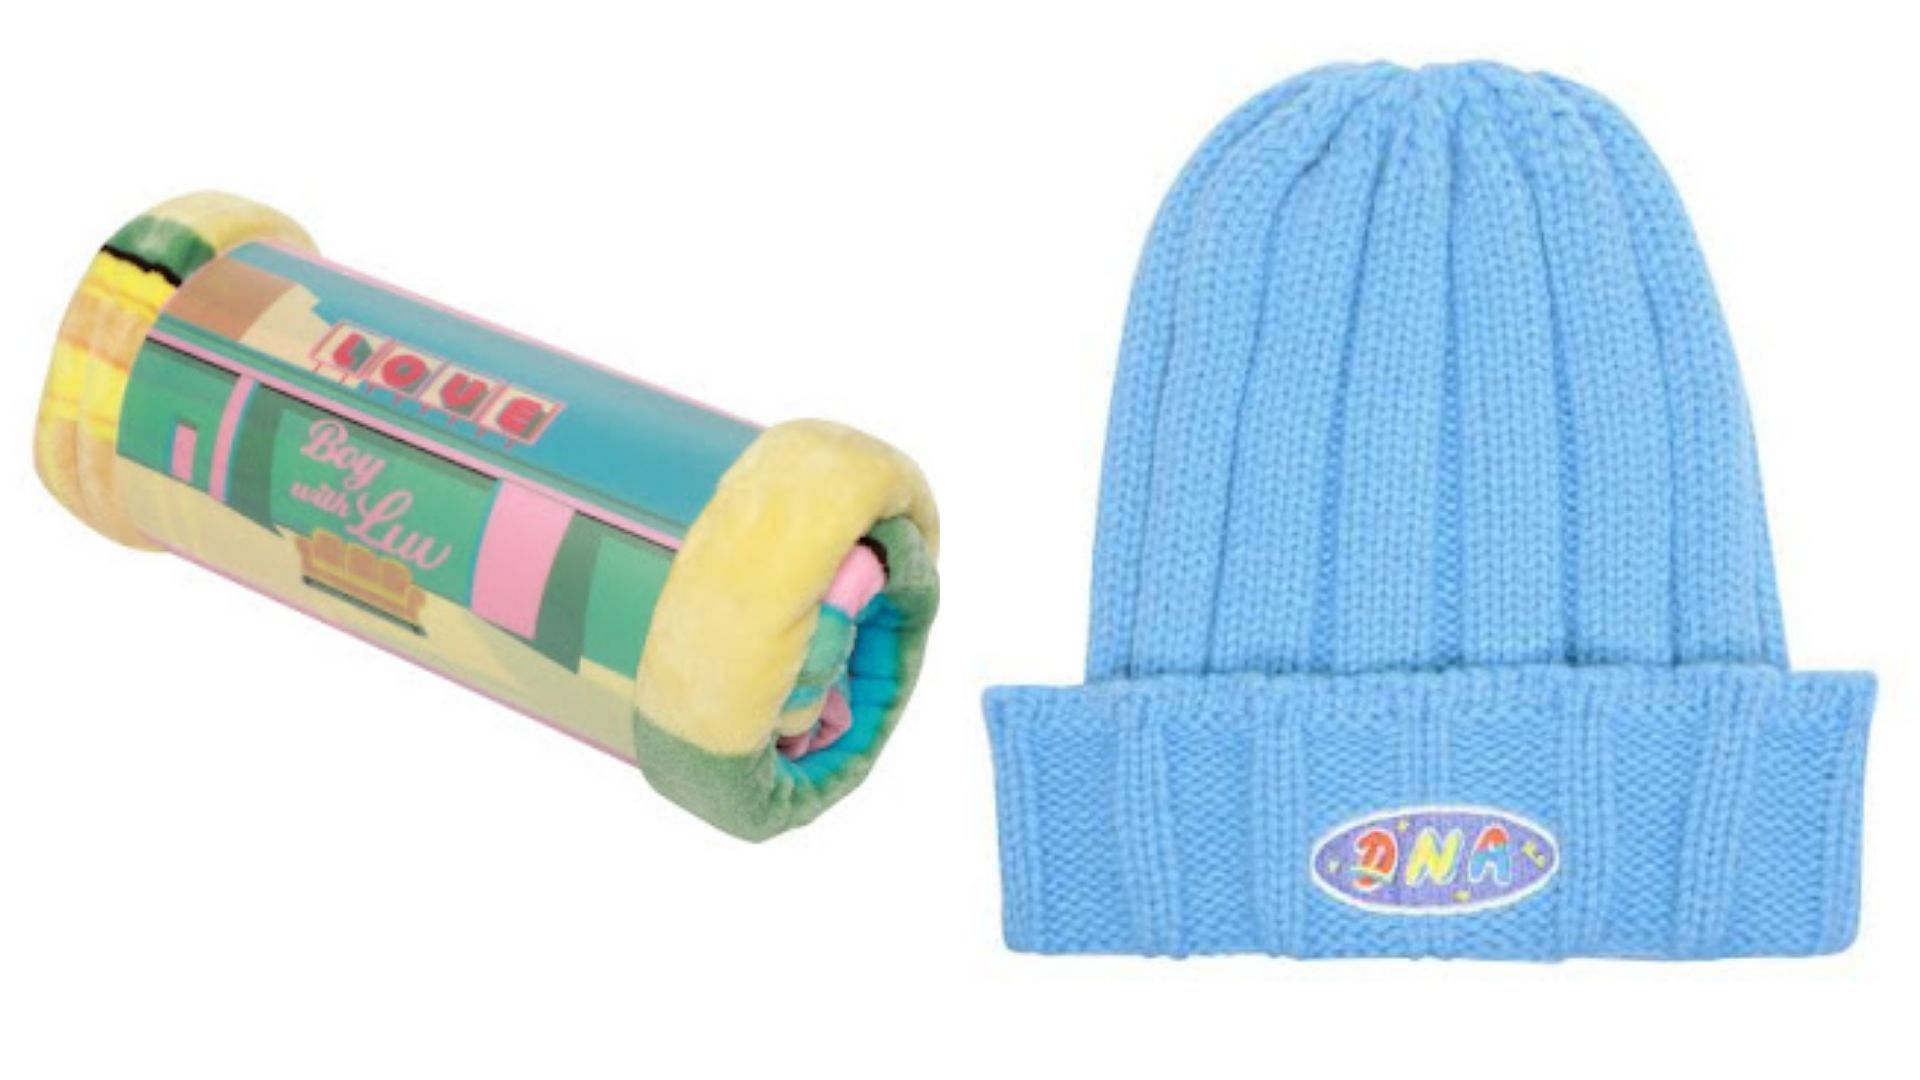 Boy With Luv Blanket for $30.80 and DNA Chunky Knit Beanie for $38.50 (Image via Nordstrom)